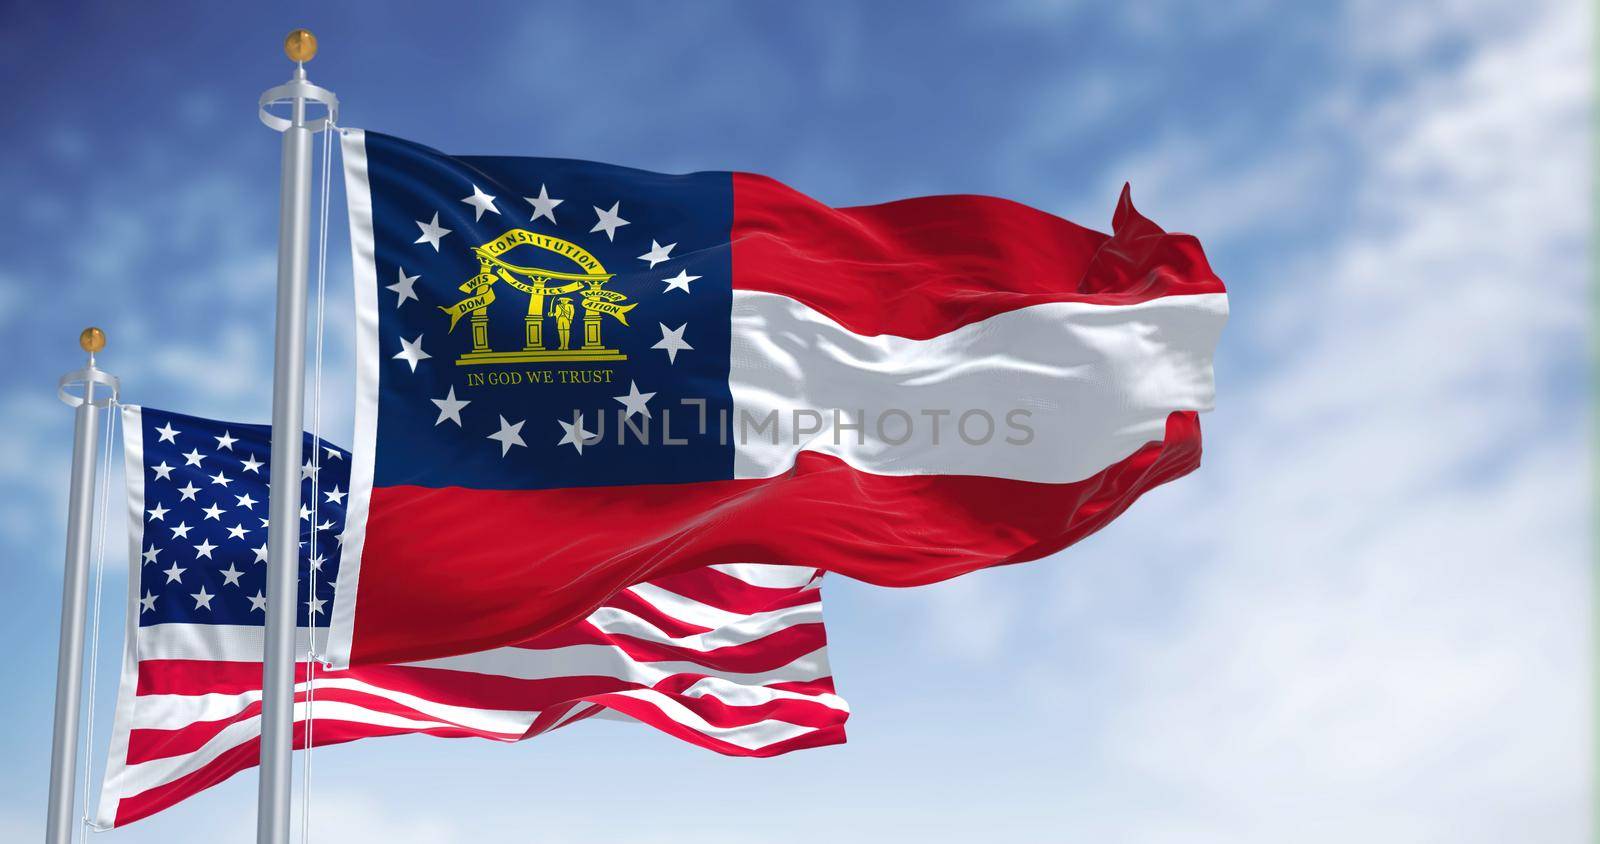 The Georgia state flag waving along with the national flag of the United States of America by rarrarorro